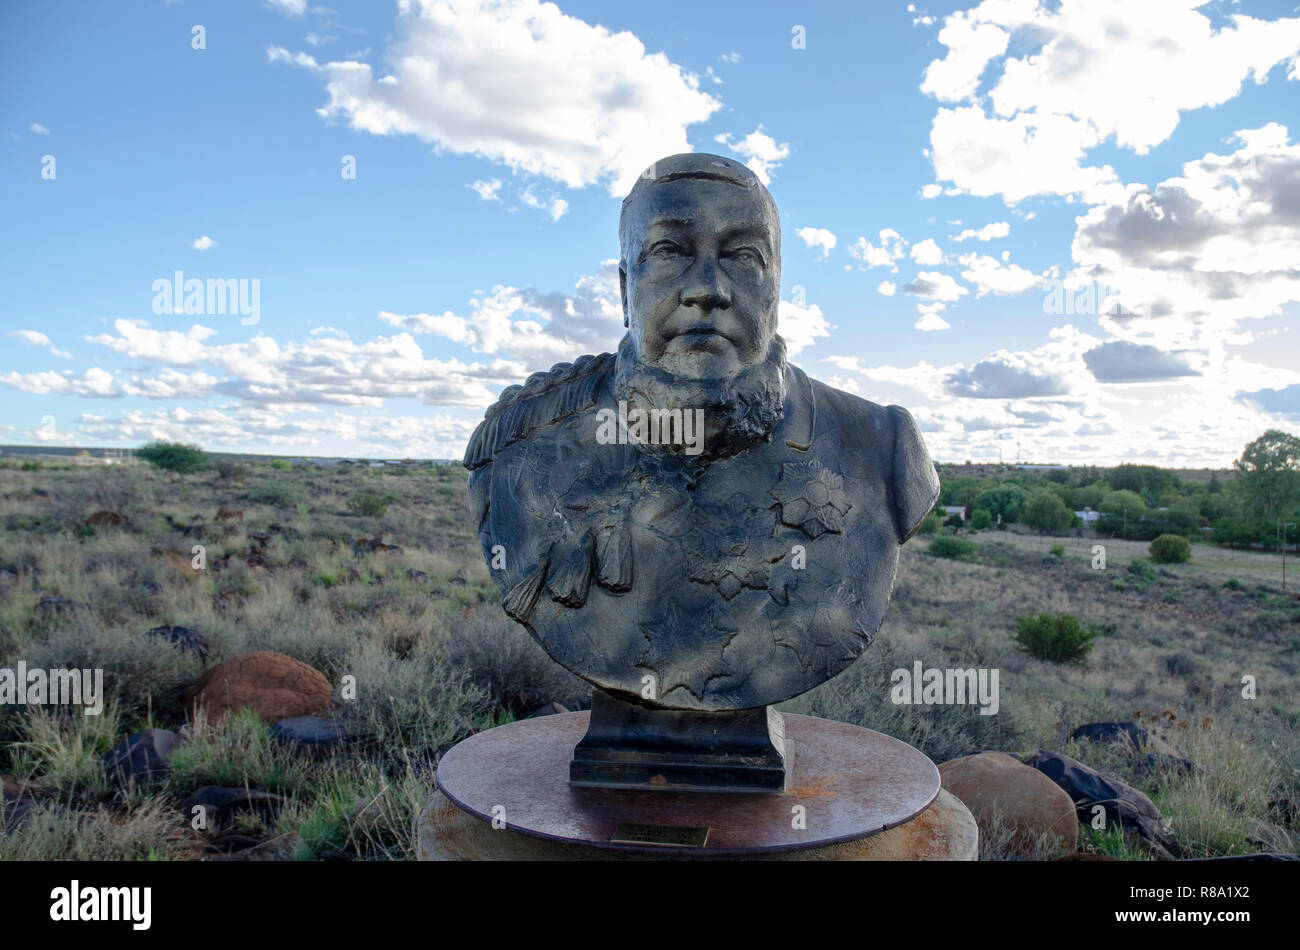 Former South African President Paul Kruger, stands among the busts of South African Afrikaner presidents and generals, including H.F. Verwoerd, the mastermind of Apartheid, on a hill in Orania, Northern Cape, Friday, December 12, 2013. As South Africa has been ridding itself of its painful past by removing the busts from various public places around the country, Orania has been collecting them, and built concrete pedestals to put them on. Orania is an Afrikaner (only) town located along the Orange River in the Karoo. Photo: Eva-Lotta Jansson Stock Photo